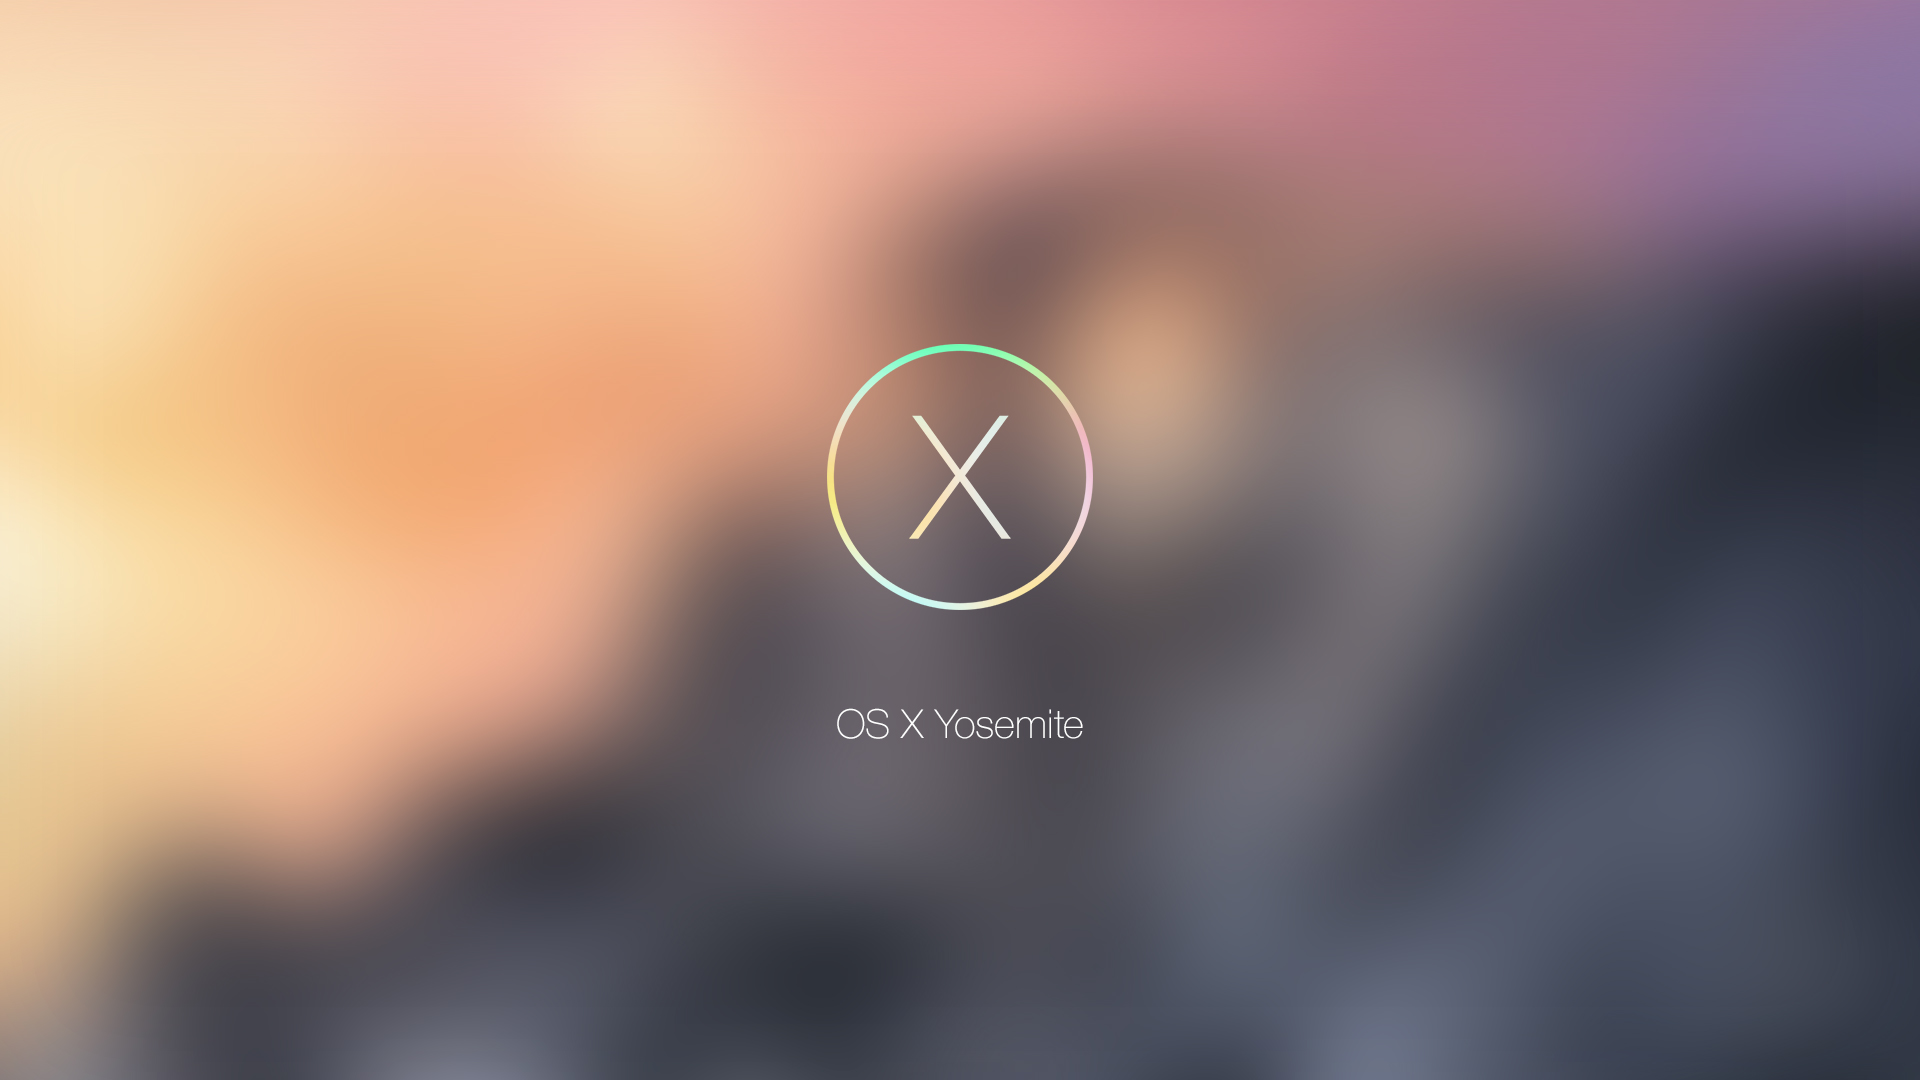 Time I M Runnig Os X Yosemite And There Is Only One New Wallpaper